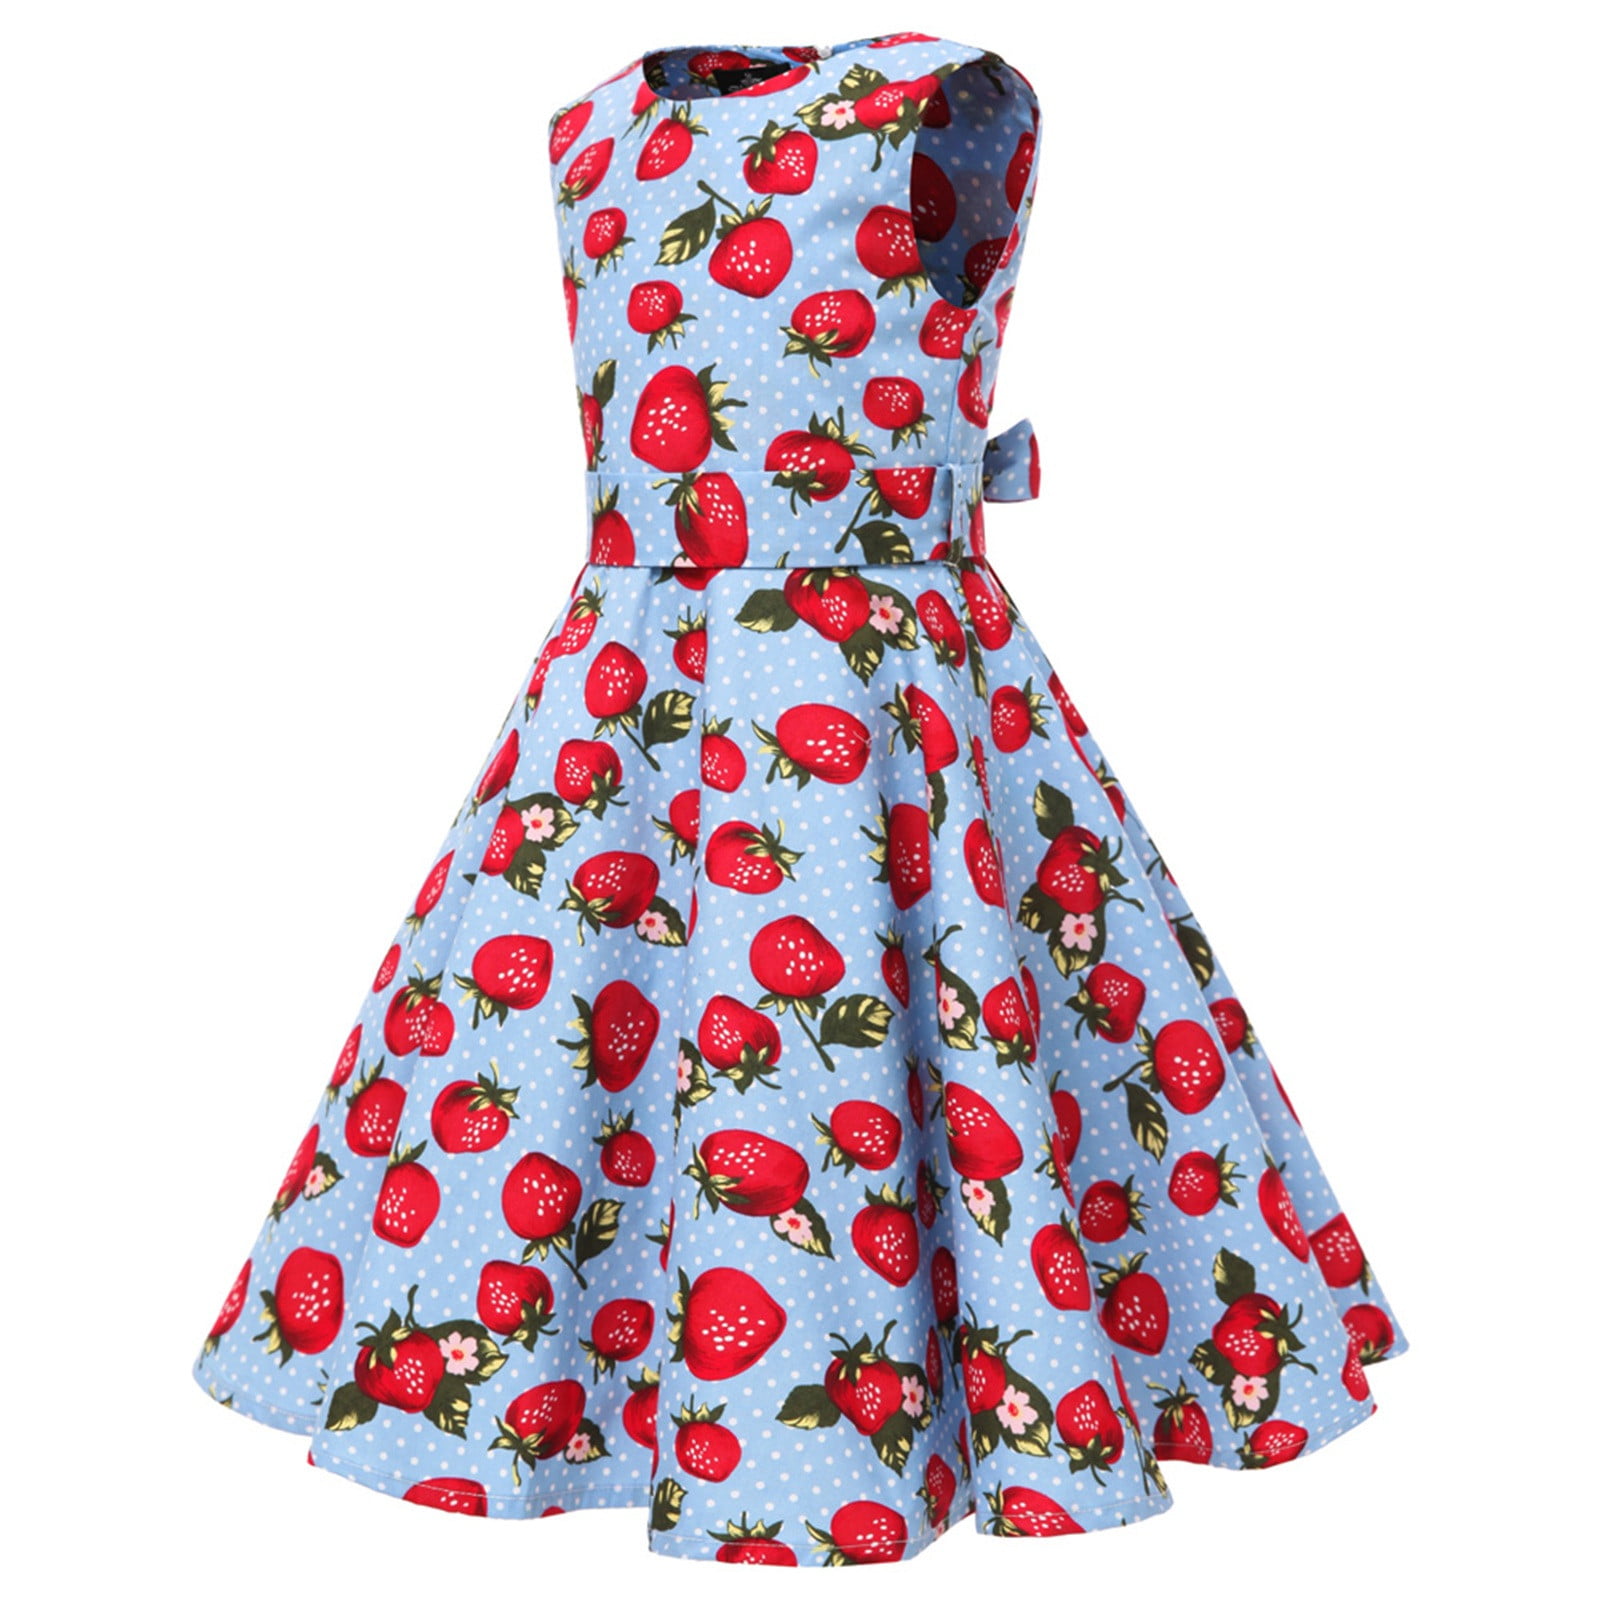  Outfits Party Sleeveless Gown Dress Kid Dots Prints